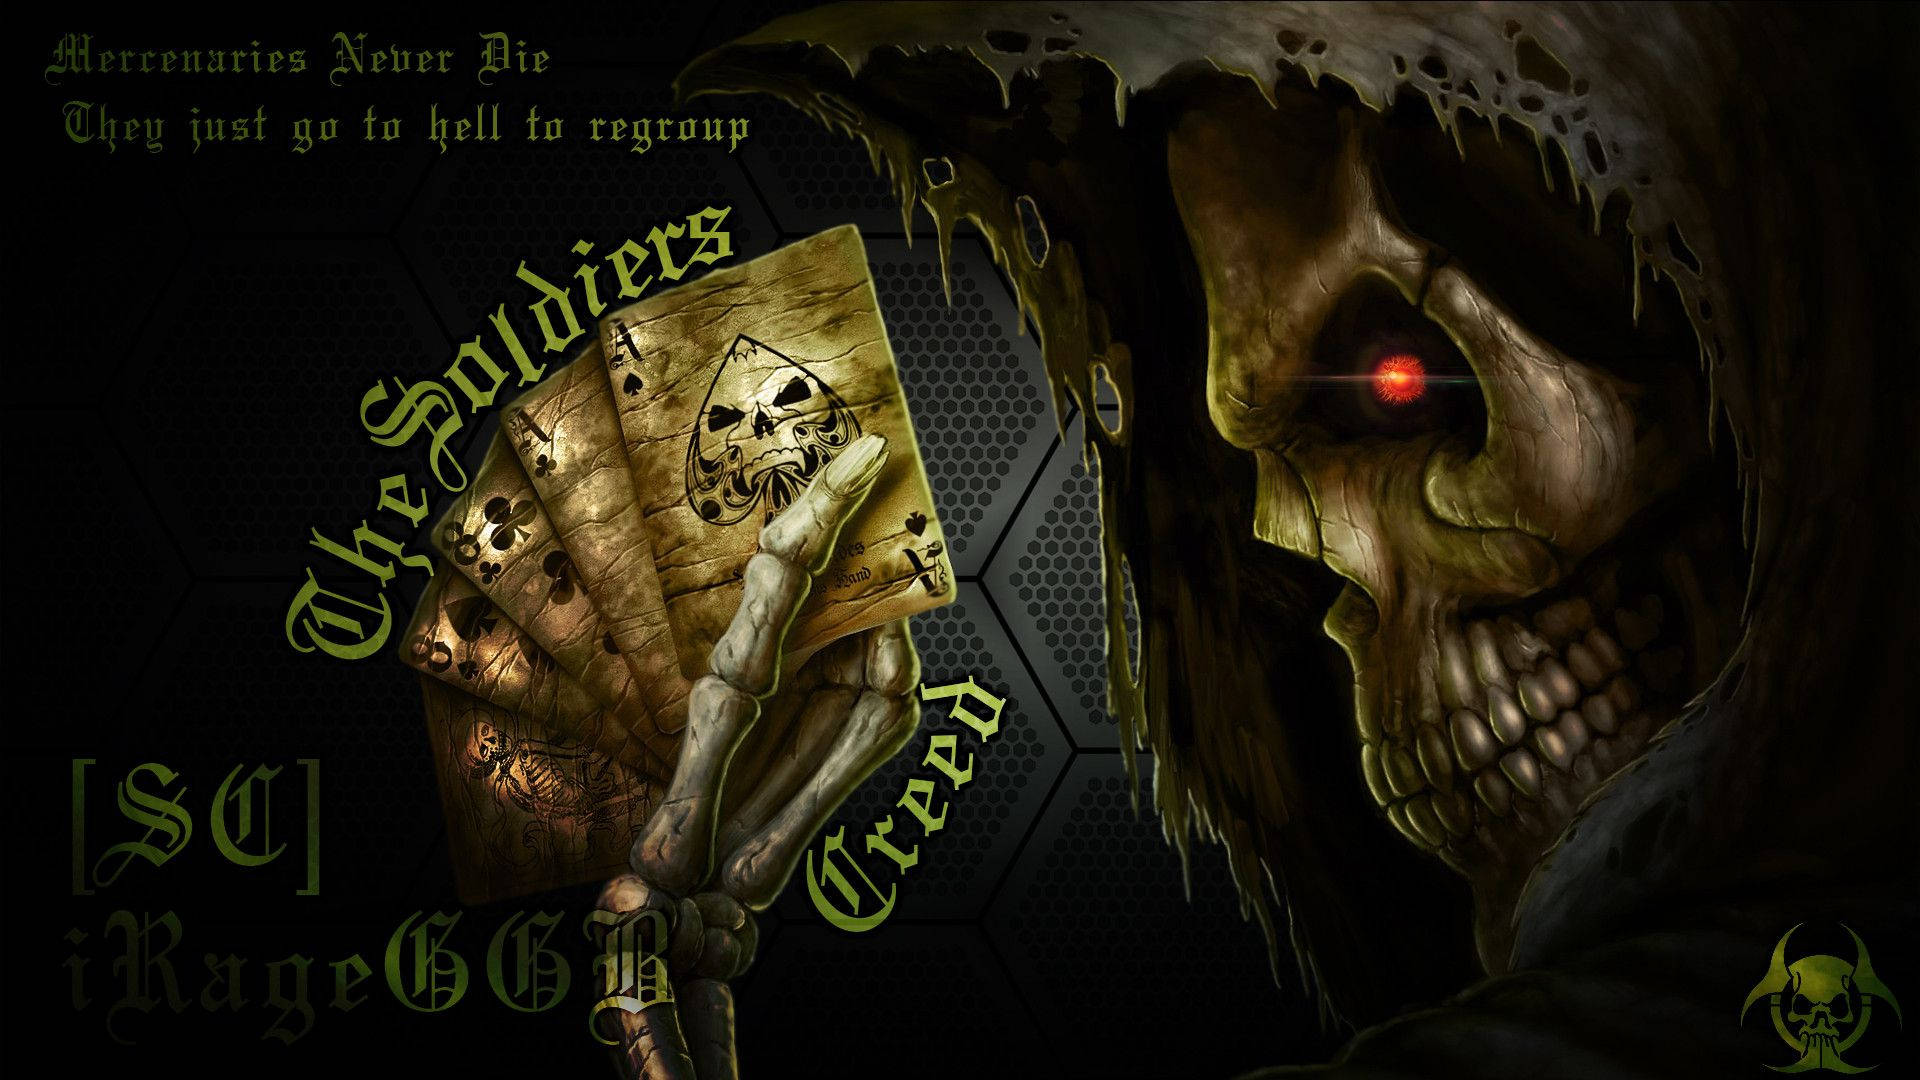 Grim Reaper 1920X1080 Wallpaper and Background Image